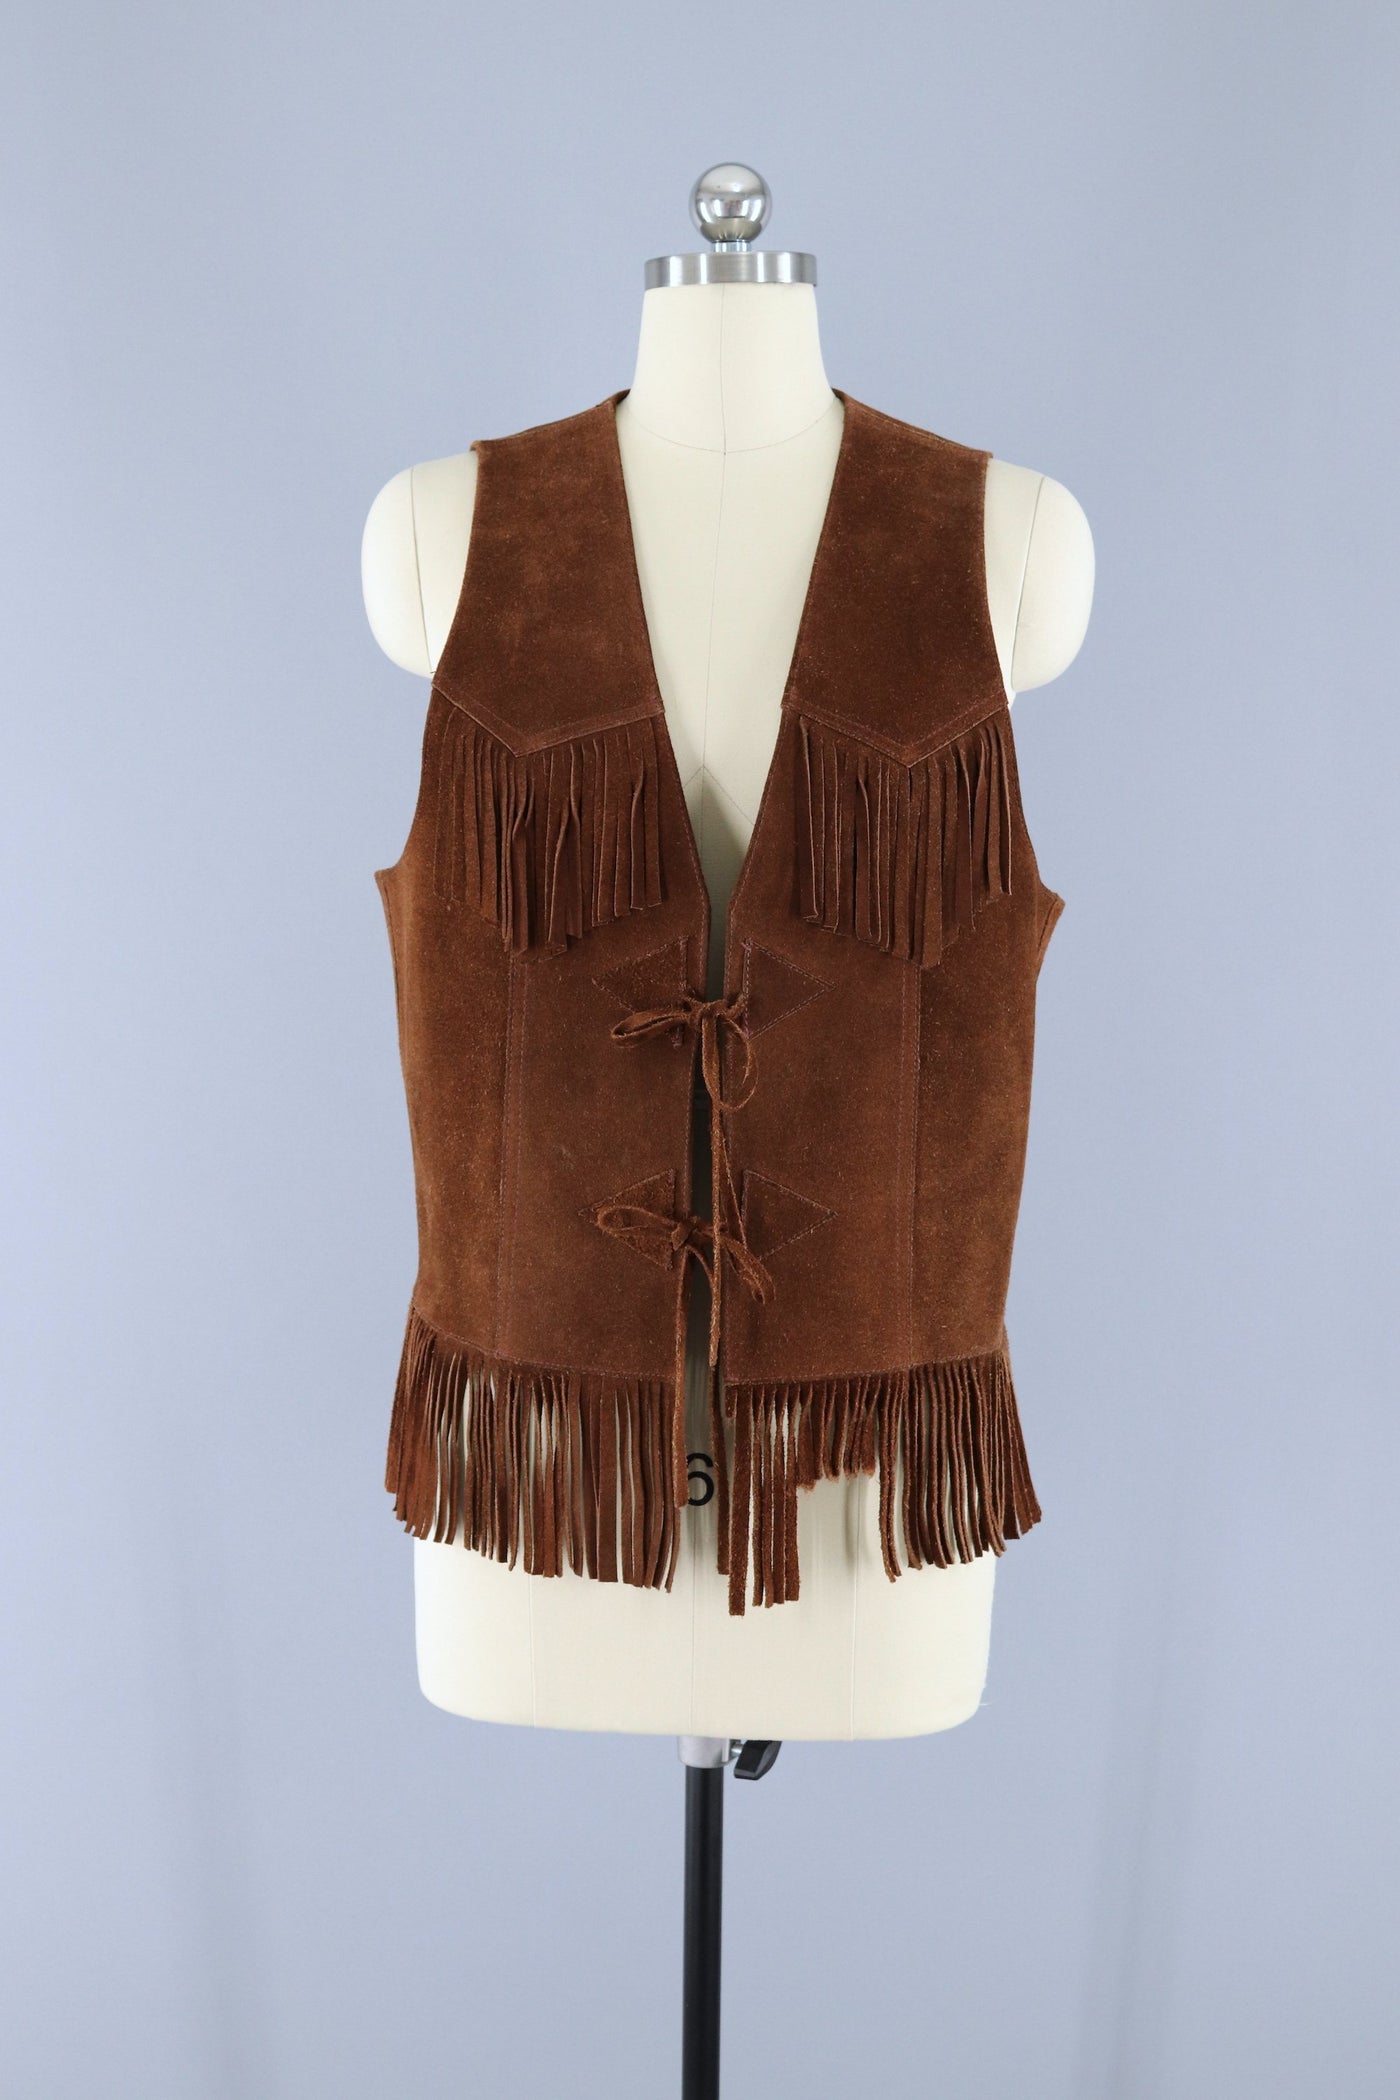 Vintage 1960s Fringed Suede Vest - ThisBlueBird